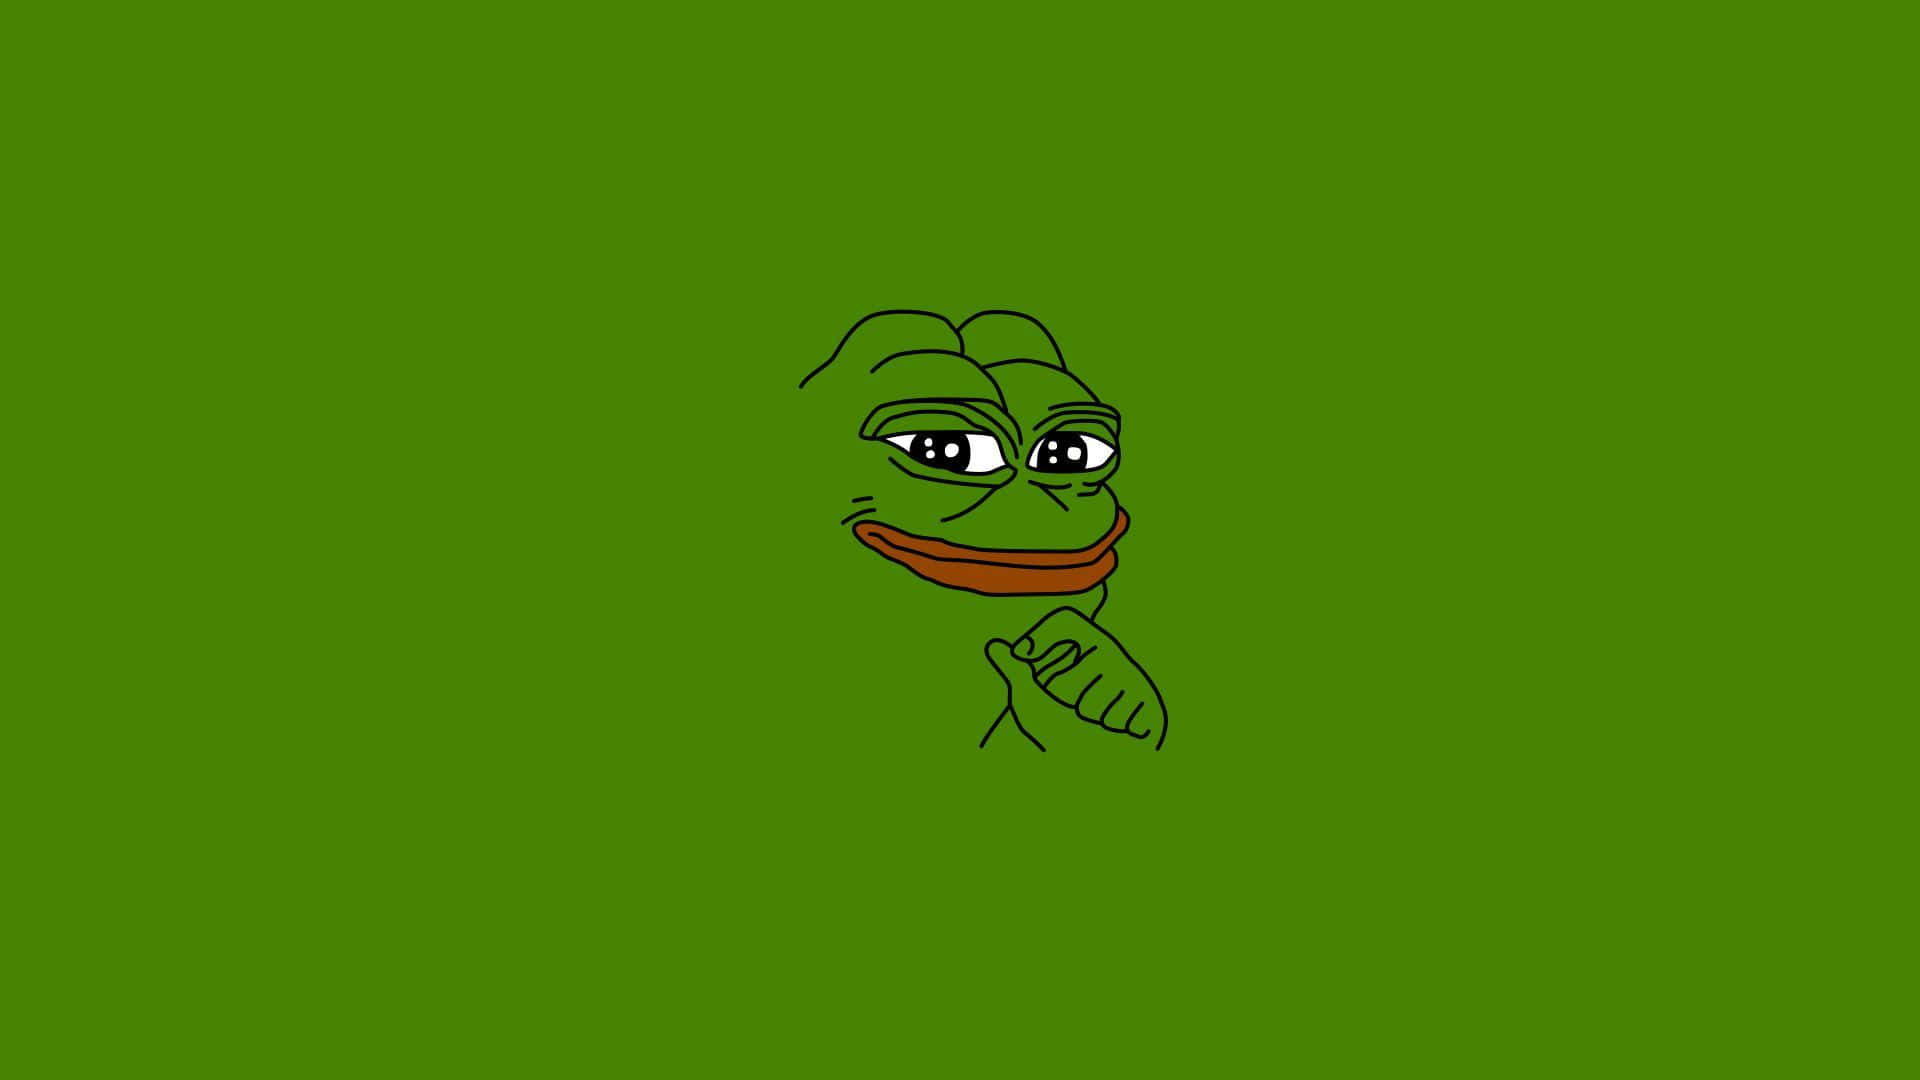 A Green Background With A Frog On It